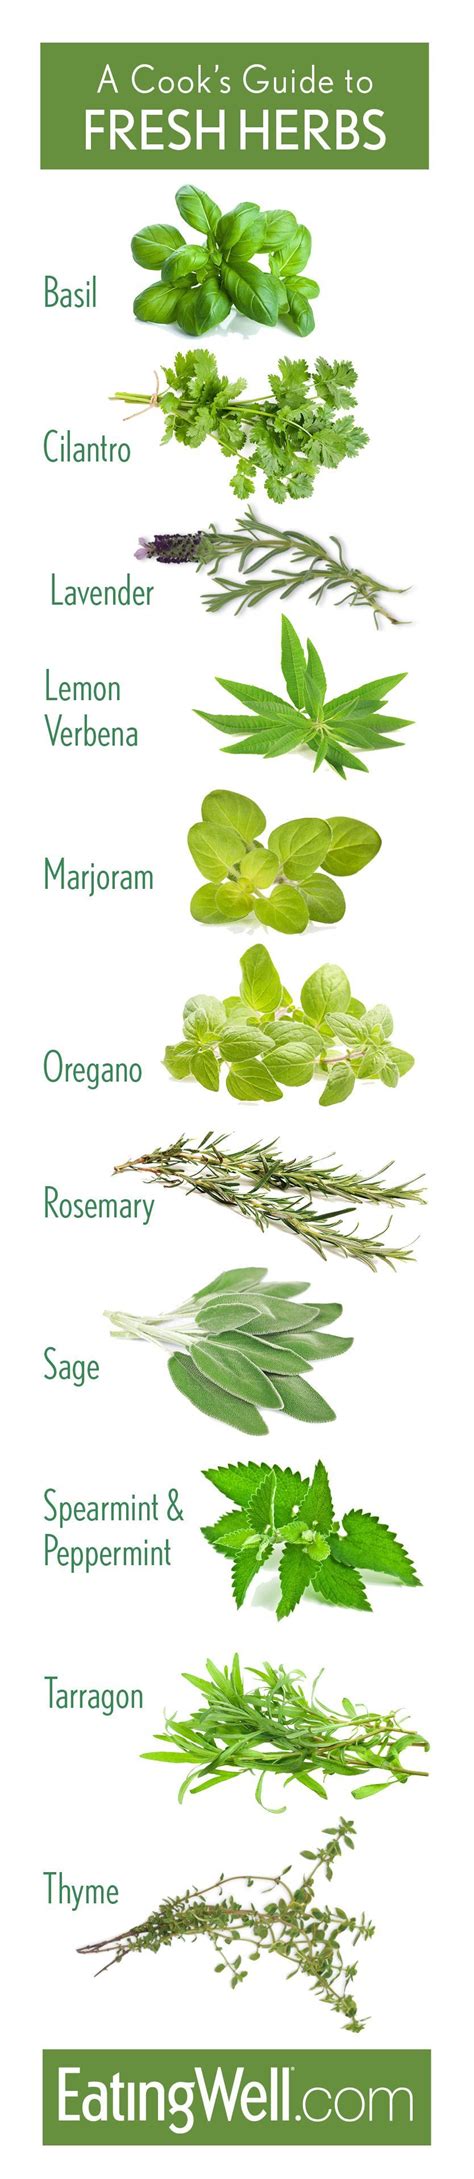 Guide To Cooking With Fresh Herbs Herbs Cooking With Fresh Herbs